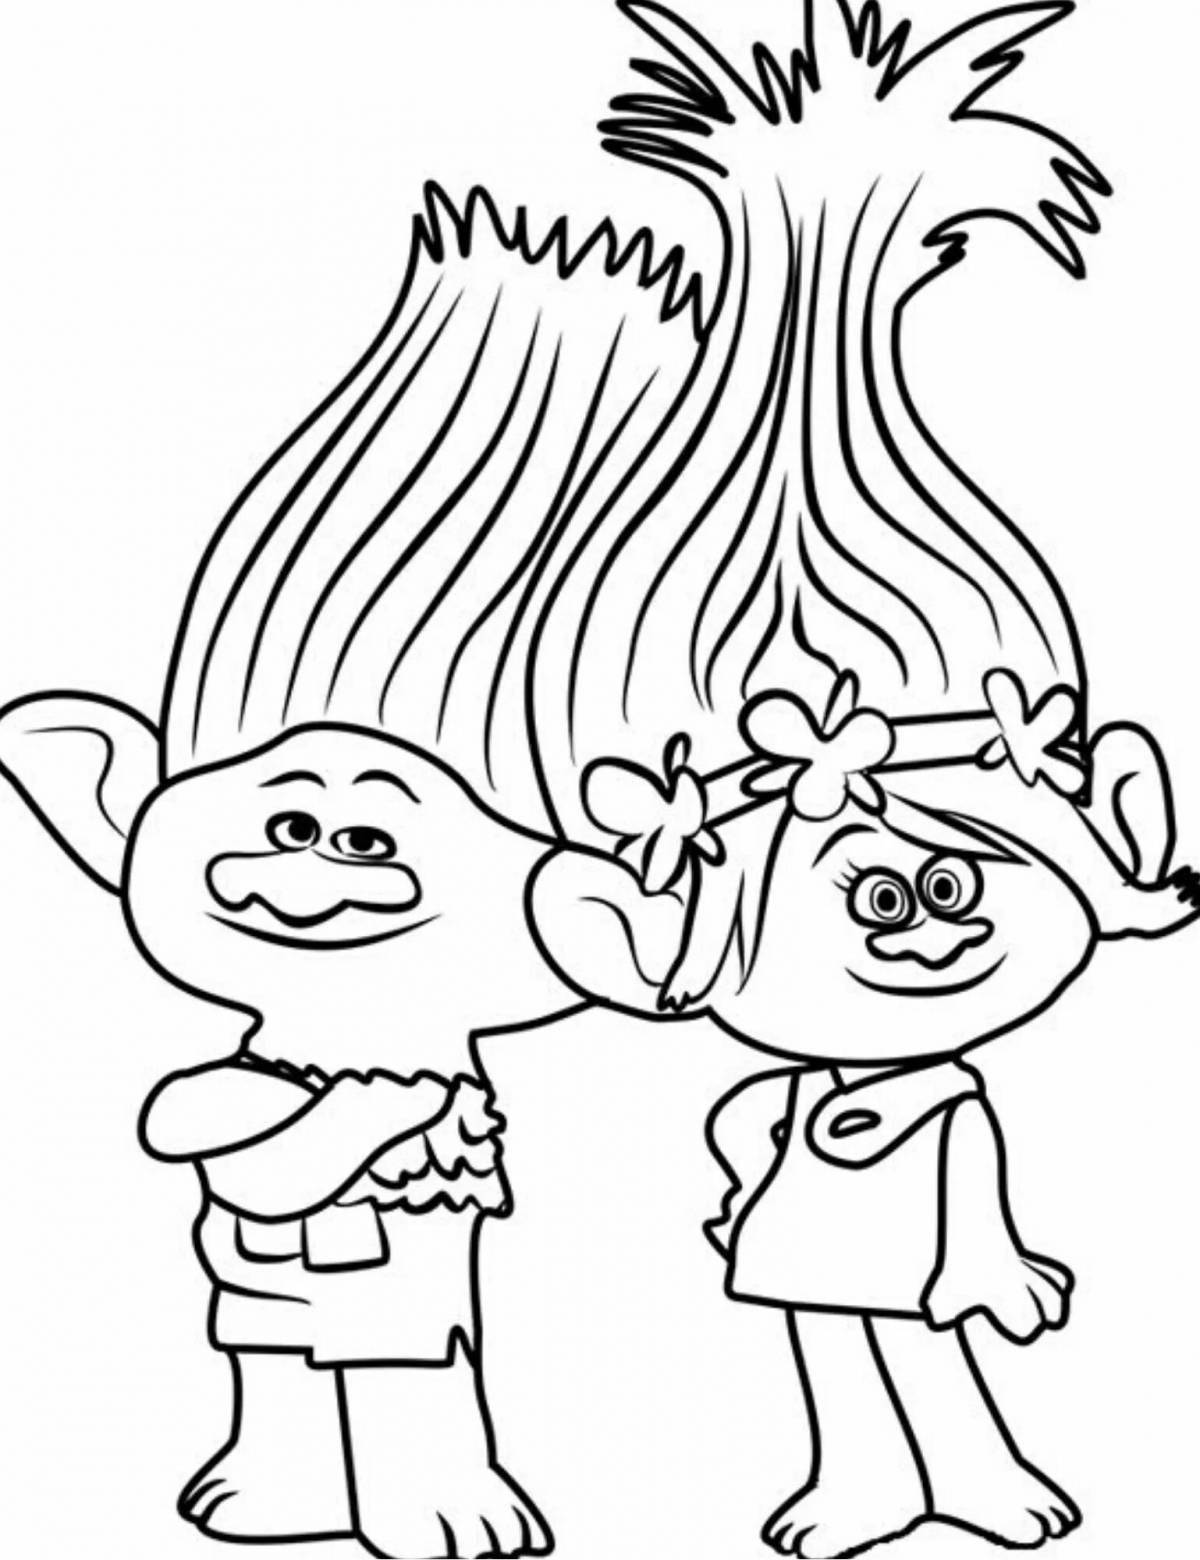 Adorable coloring book for kids trolls